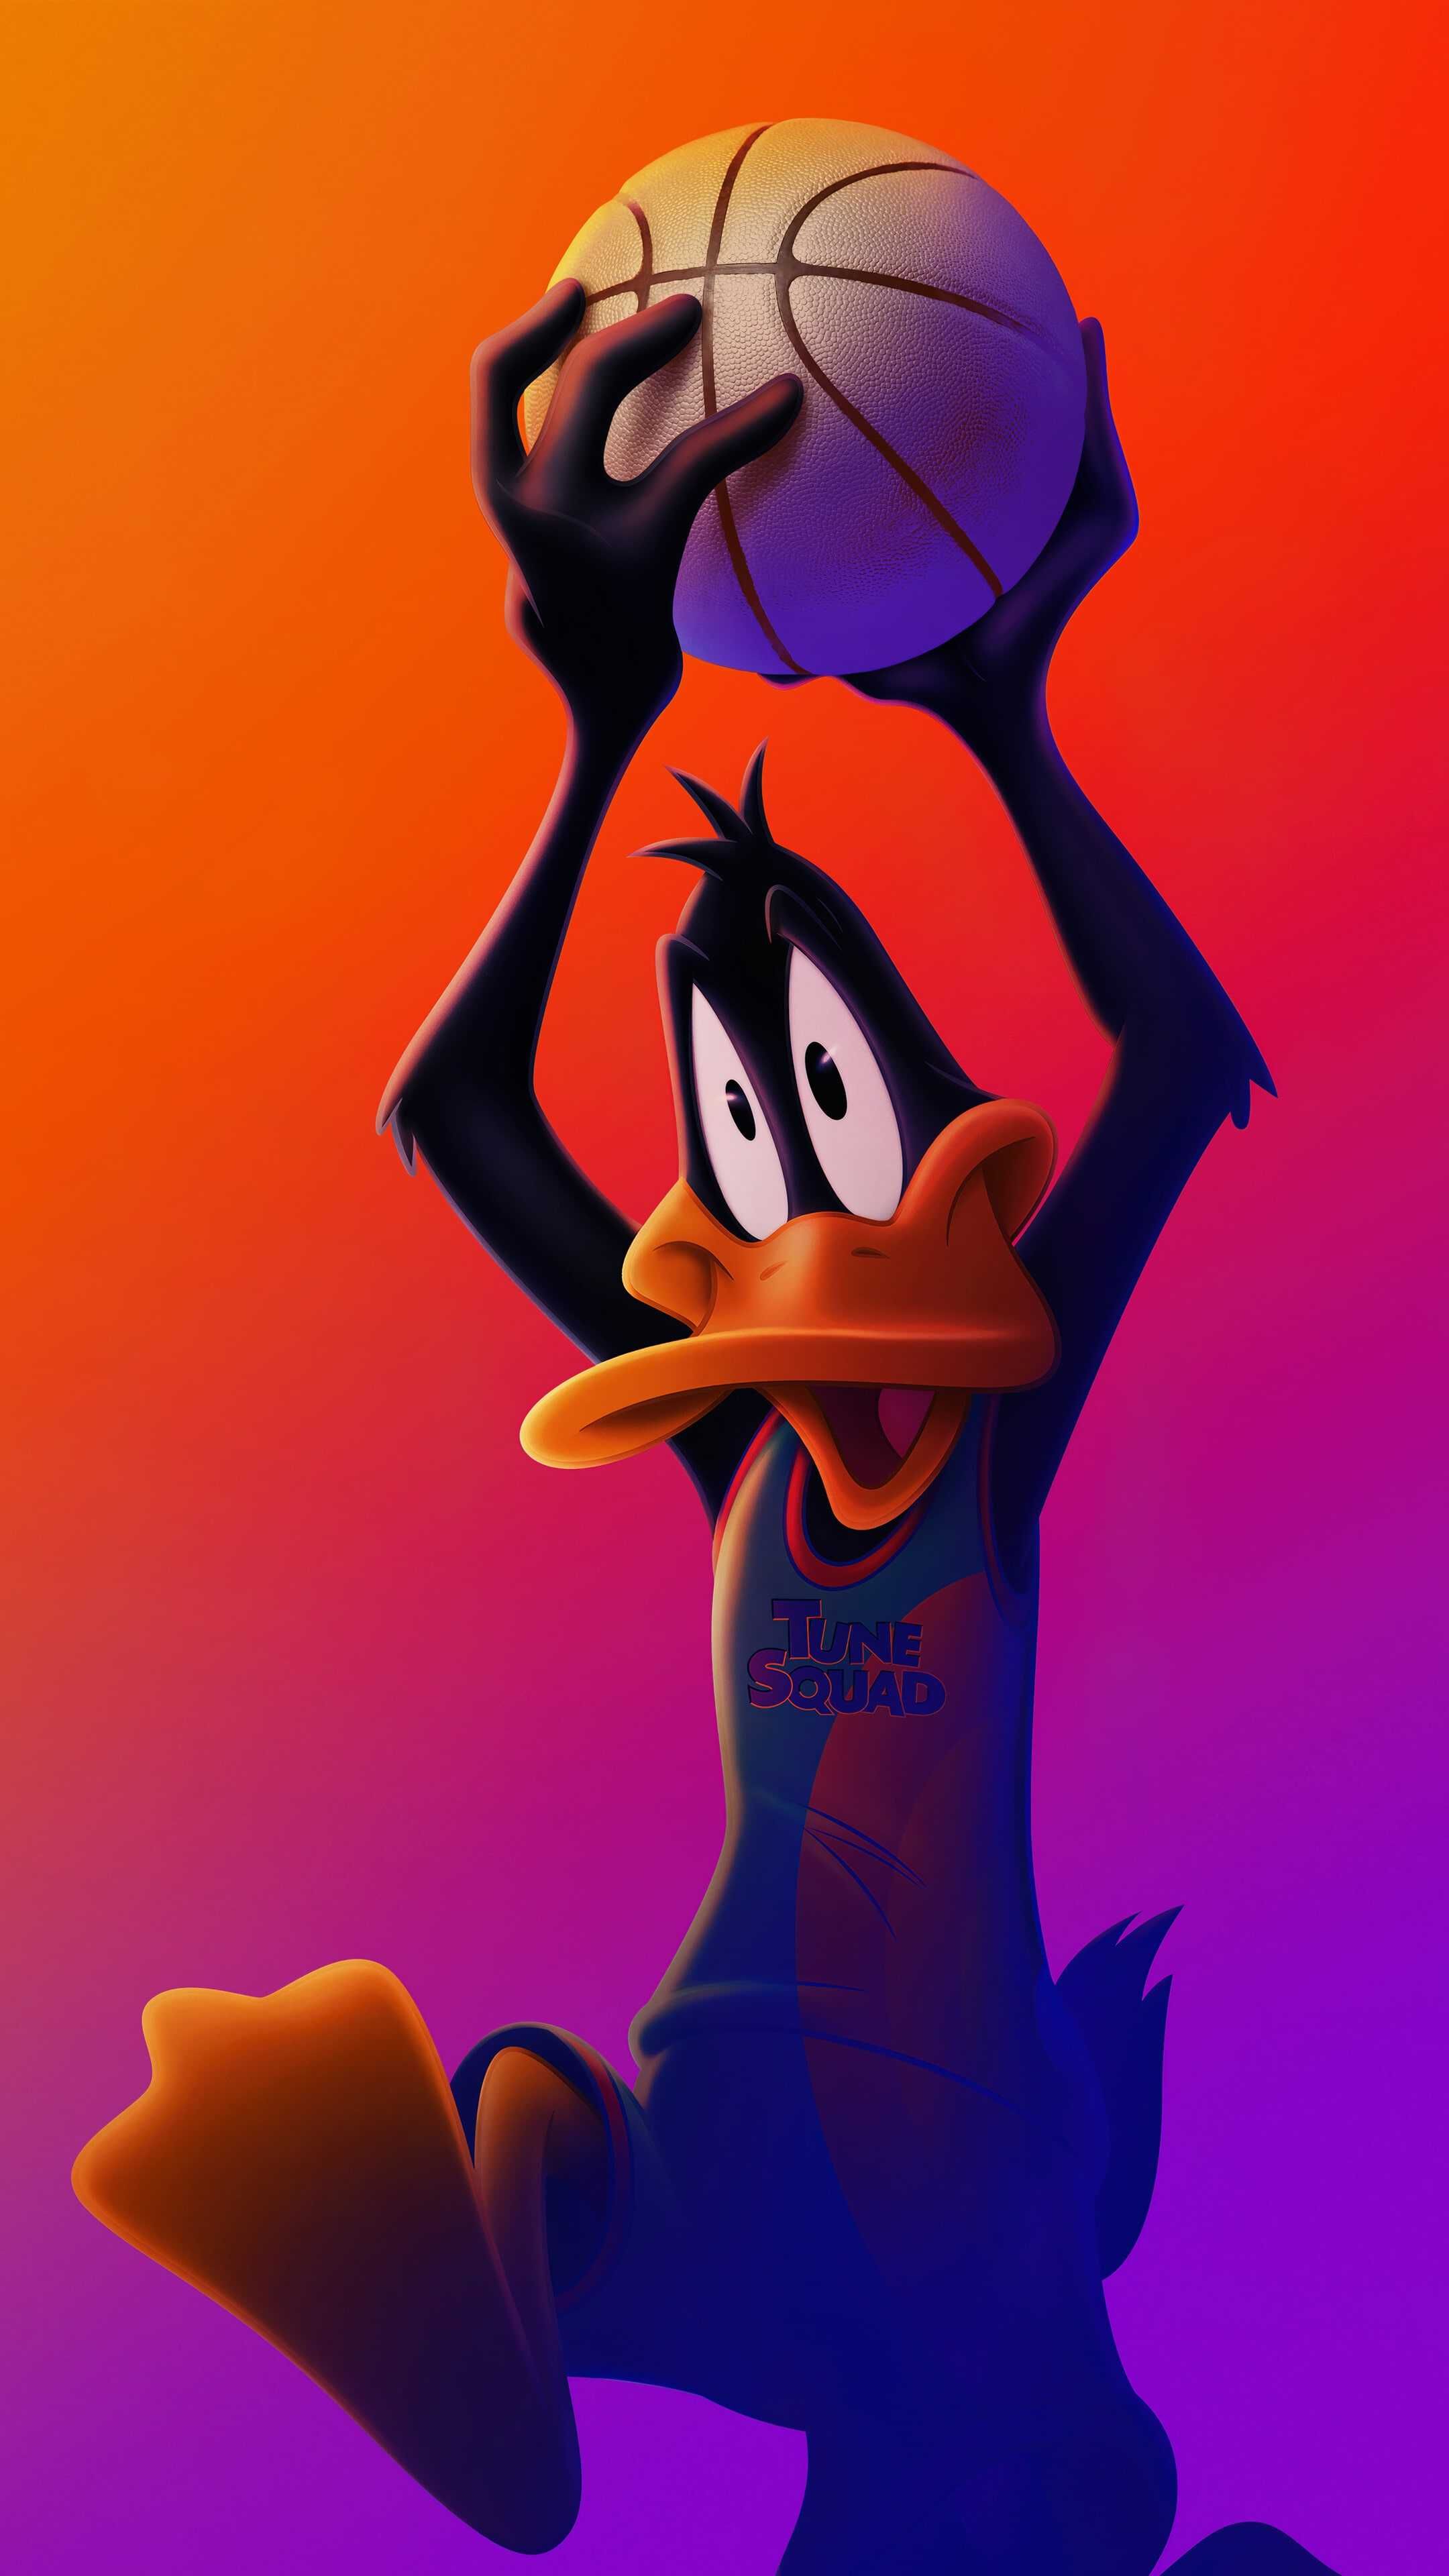 Daffy Duck Space Jam Wallpaper for mobile phone, tablet, desktop computer and other devices. HD and 4K. Looney tunes wallpaper, Daffy duck, Looney tunes space jam